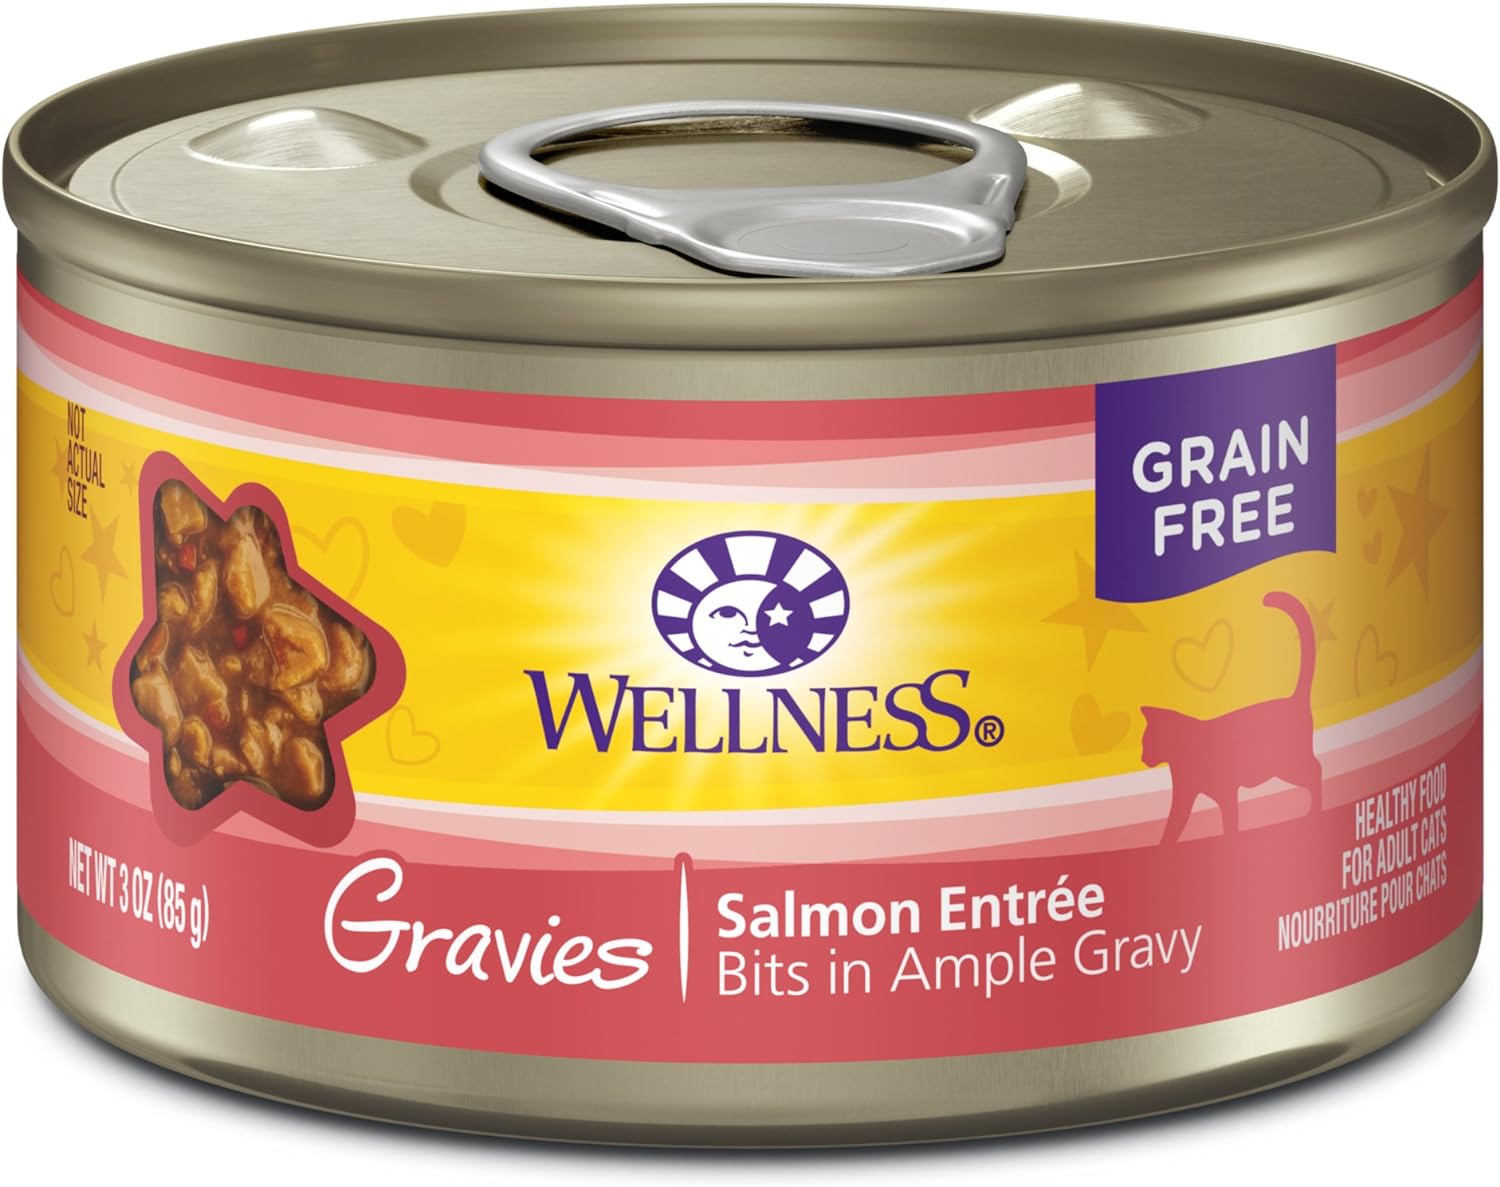 12-Pack 3-Oz Wellness Complete Health Gravies Grain Free Canned Cat Food (Salmon Entrée) $6 w/ S&S + Free Shipping w/ Prime or on $35+